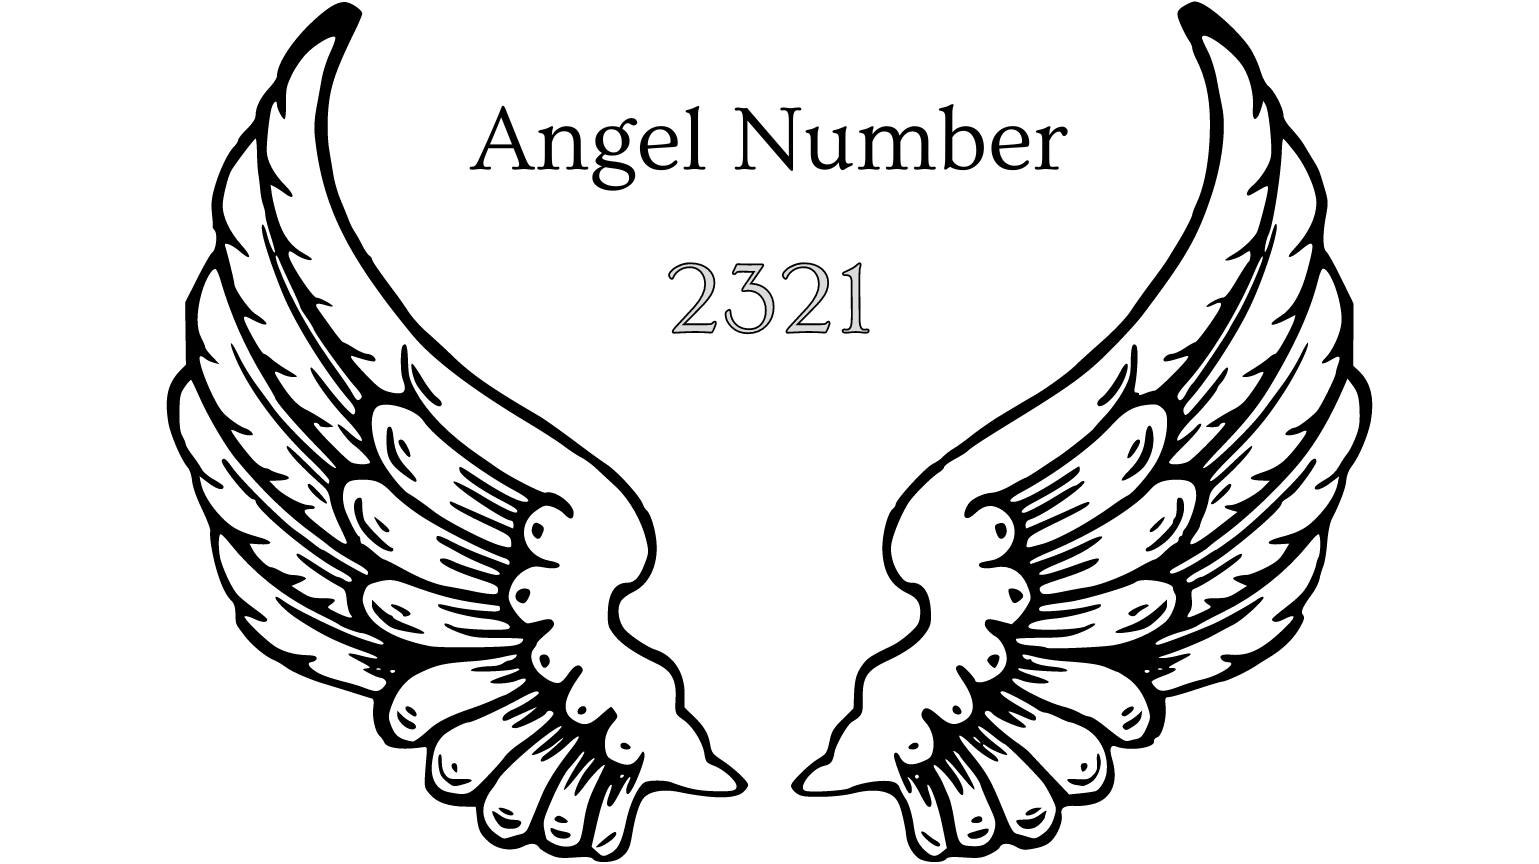 2321 Angel Number - Manifestation, Twin Flame, Biblical, Love, and More